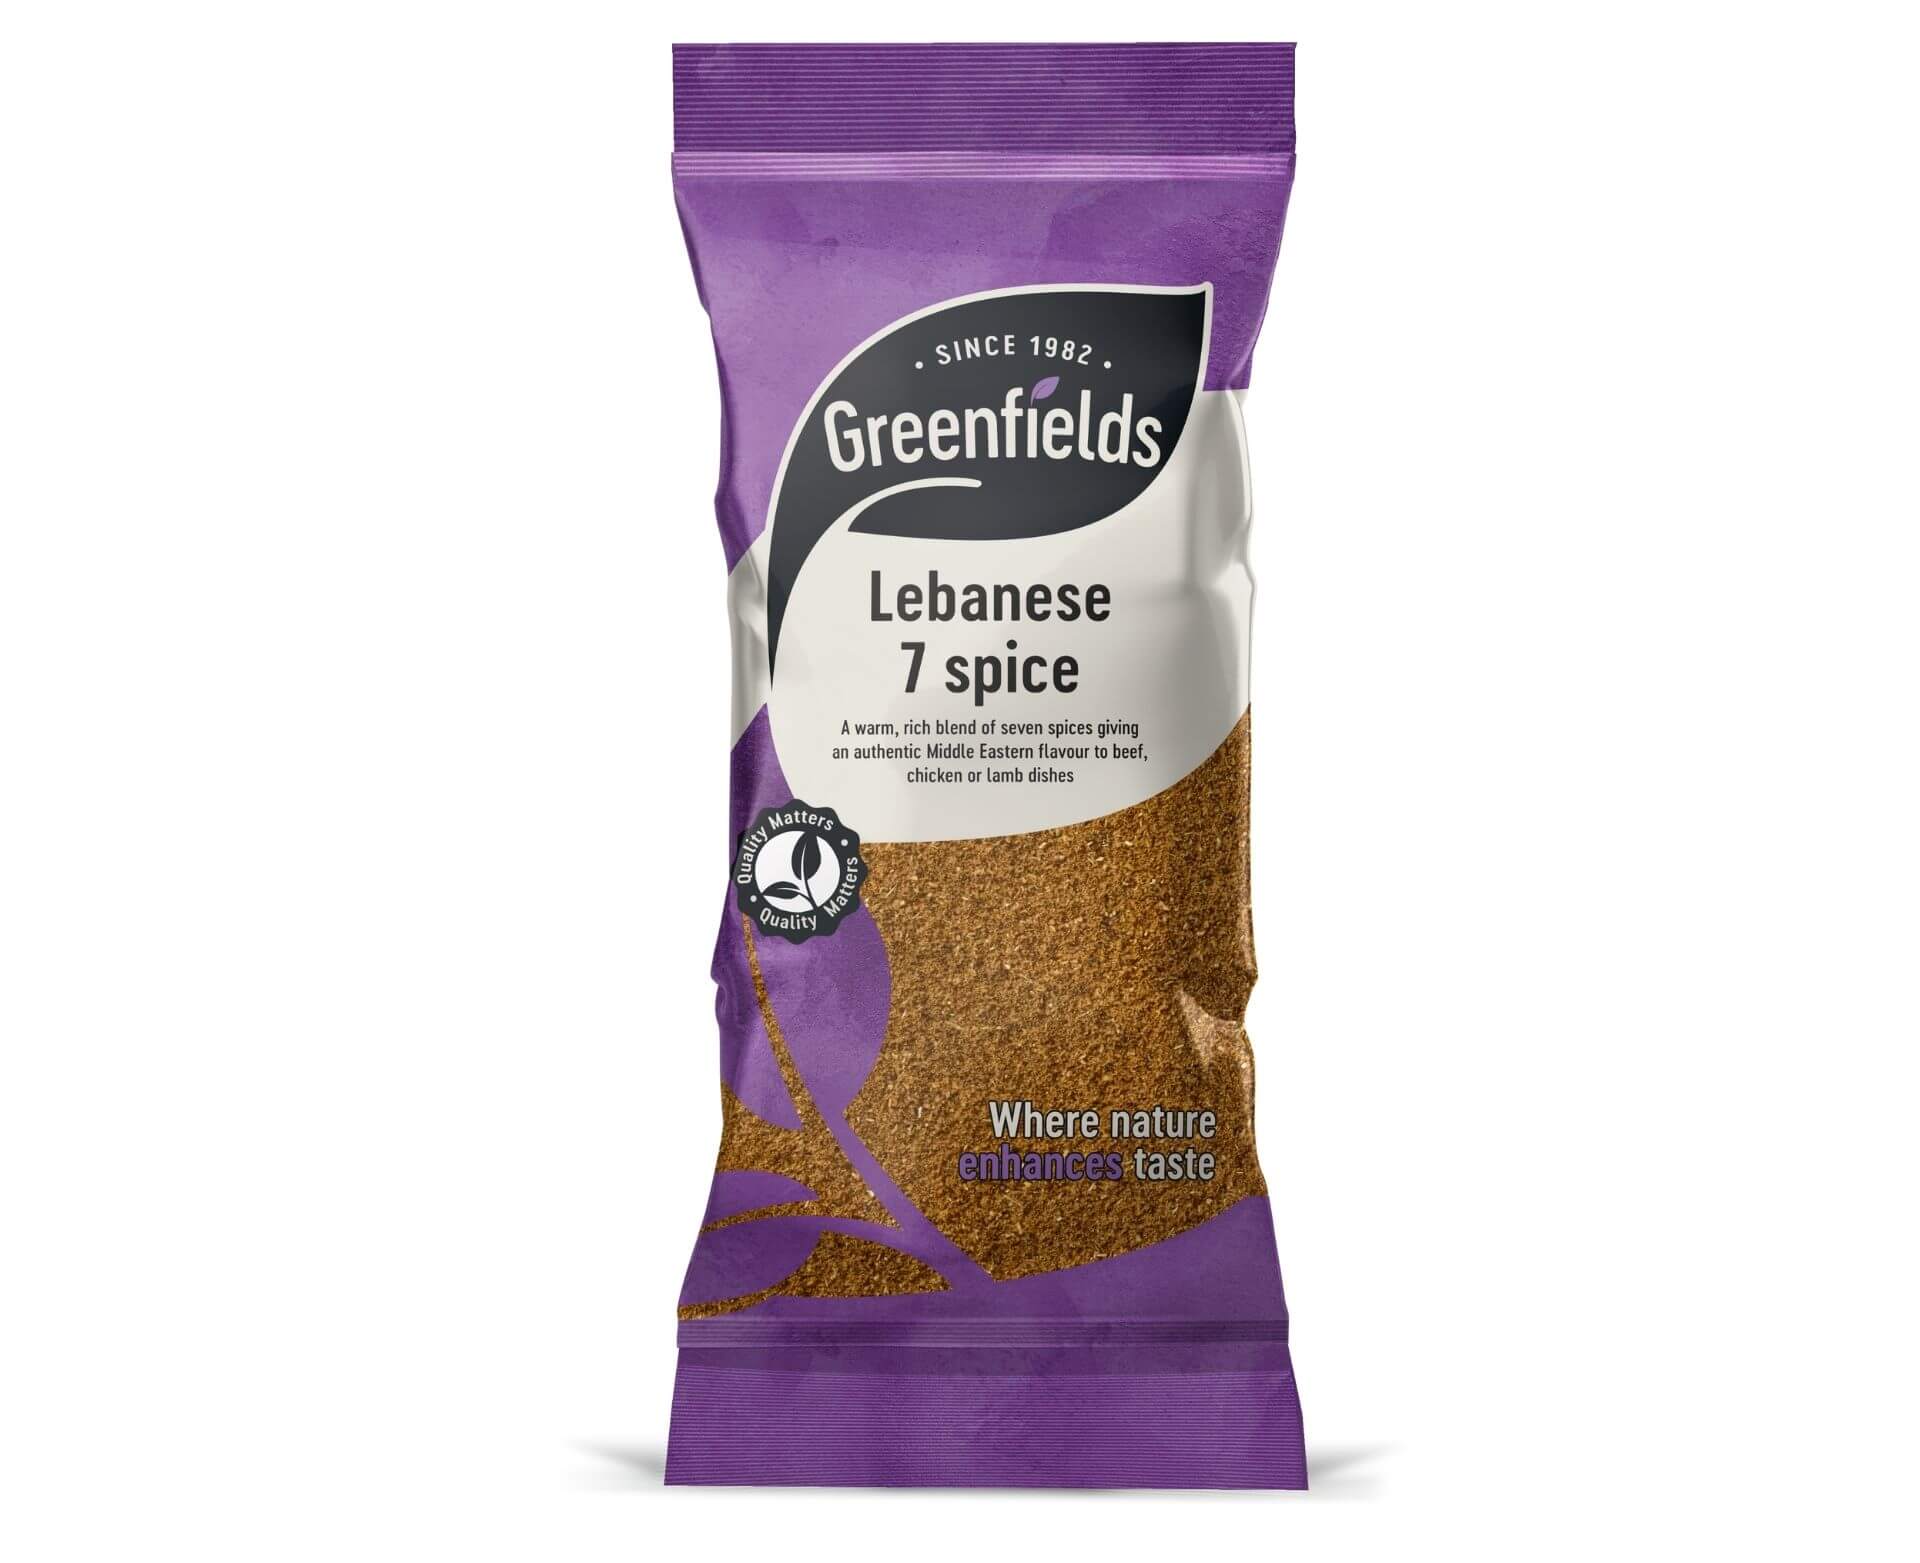 Greenfields Lebanese 7 Spice (75G) - Aytac Foods